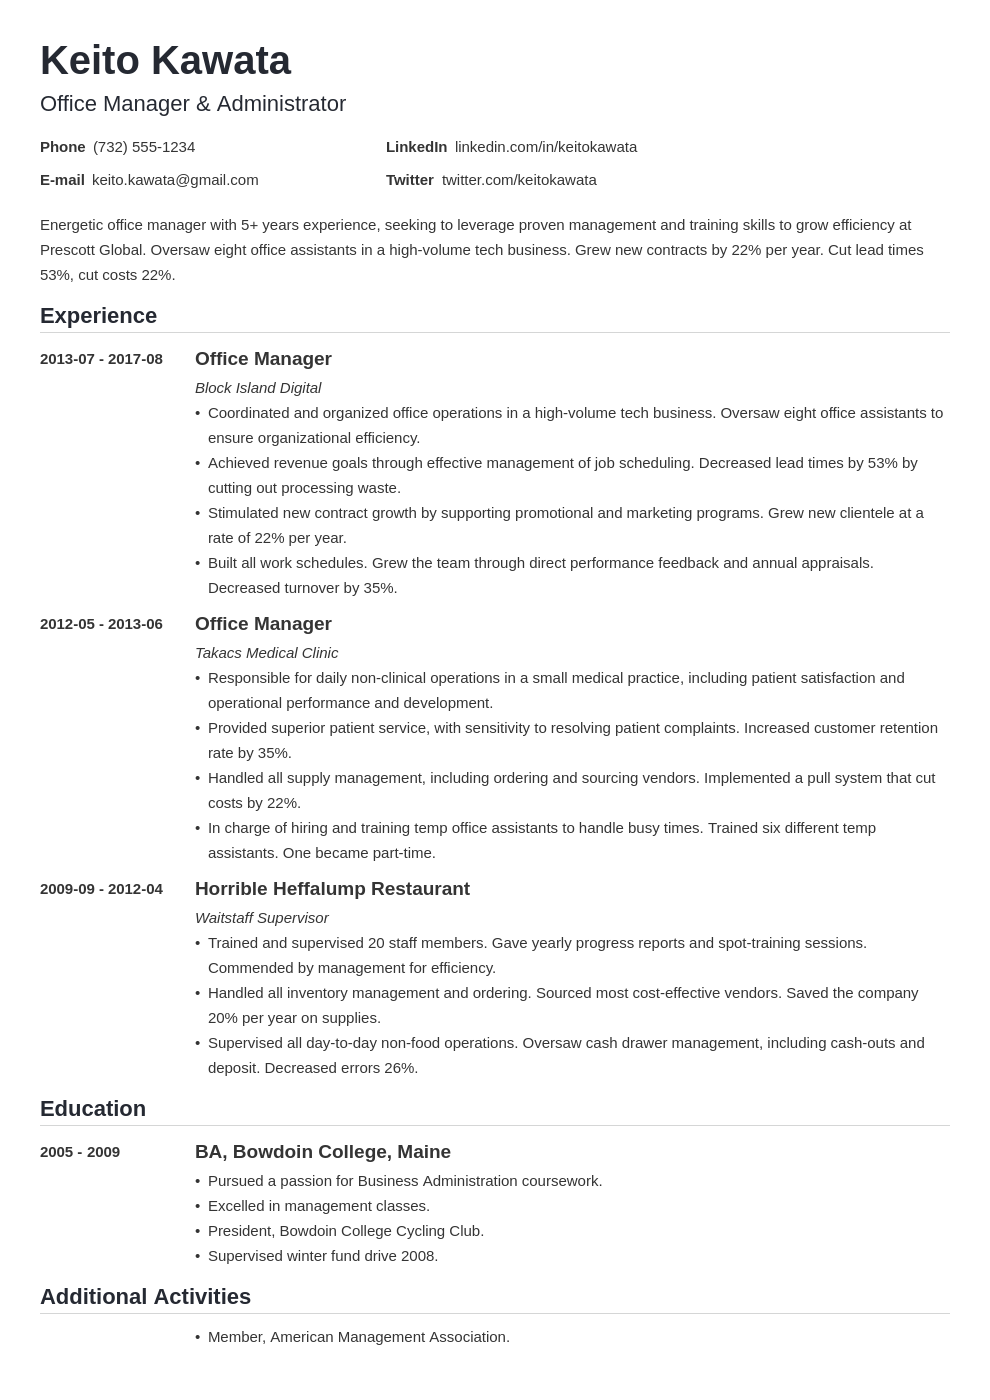 Office Manager Job Description for a Resume: Examples